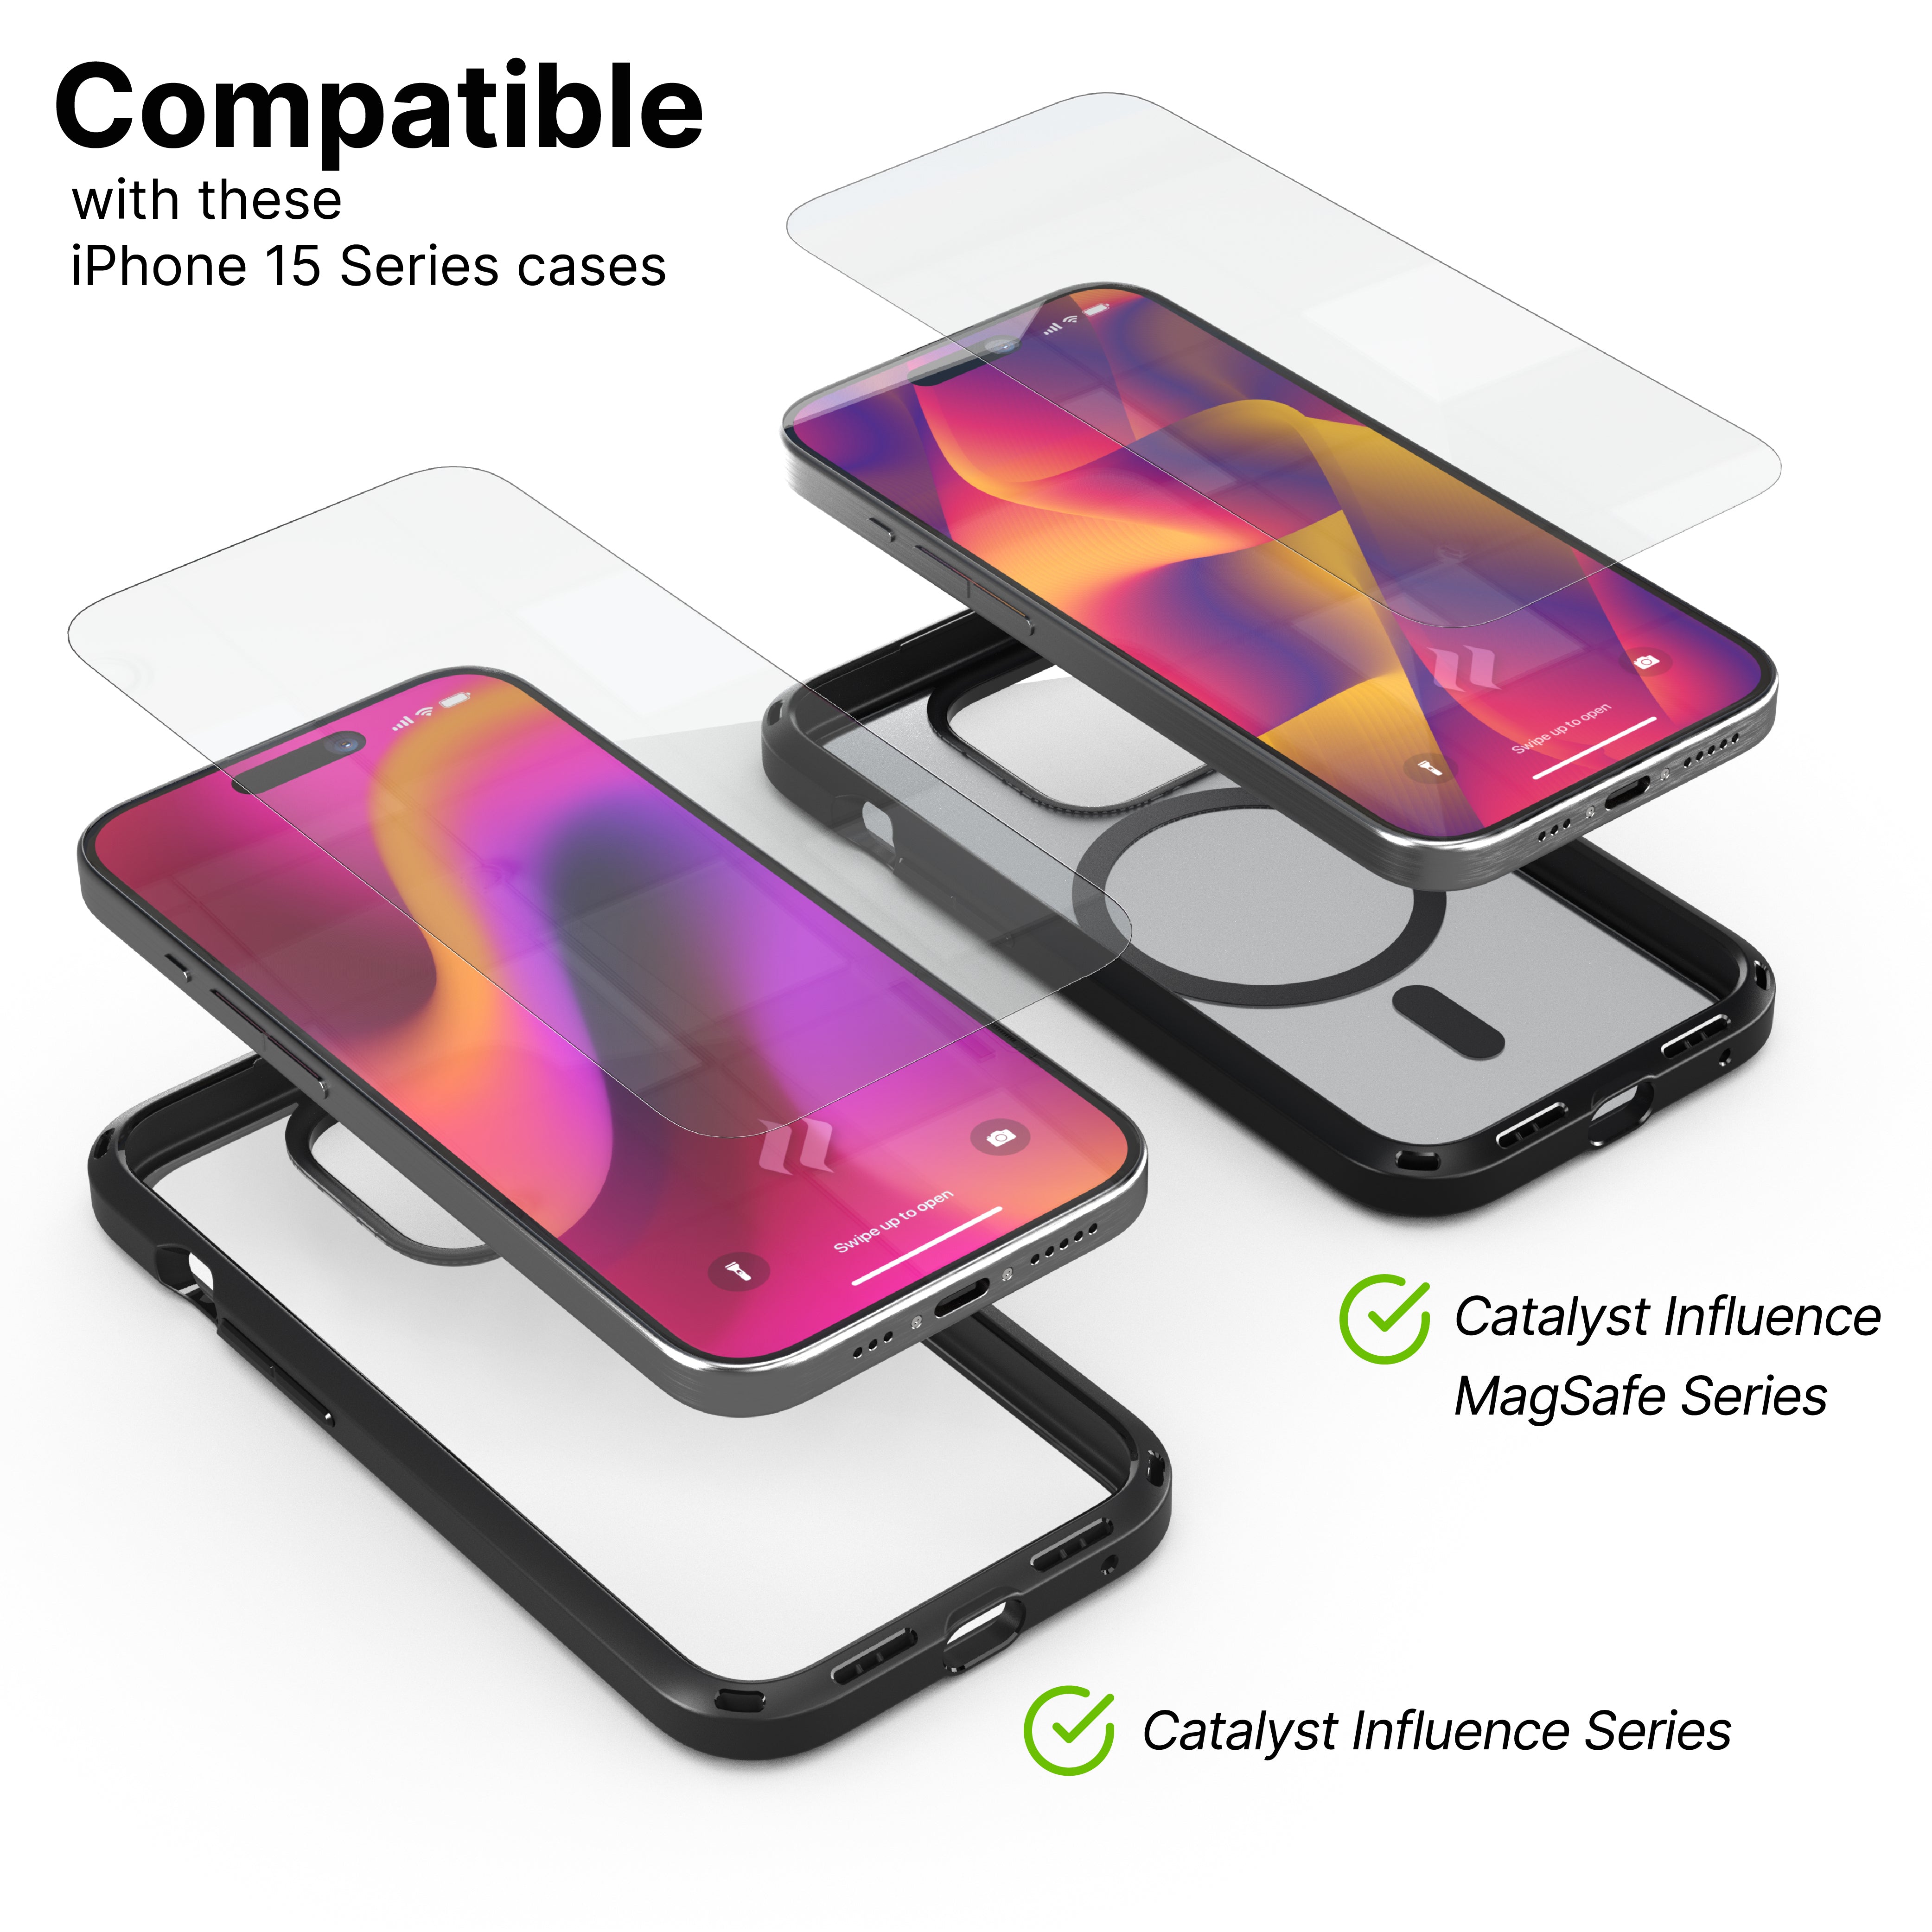 Catalyst screen protector for iphone 15 series  compatible with influence case magsafe series and influence series Text reads Compatible with these iPhone 15 Series cases.